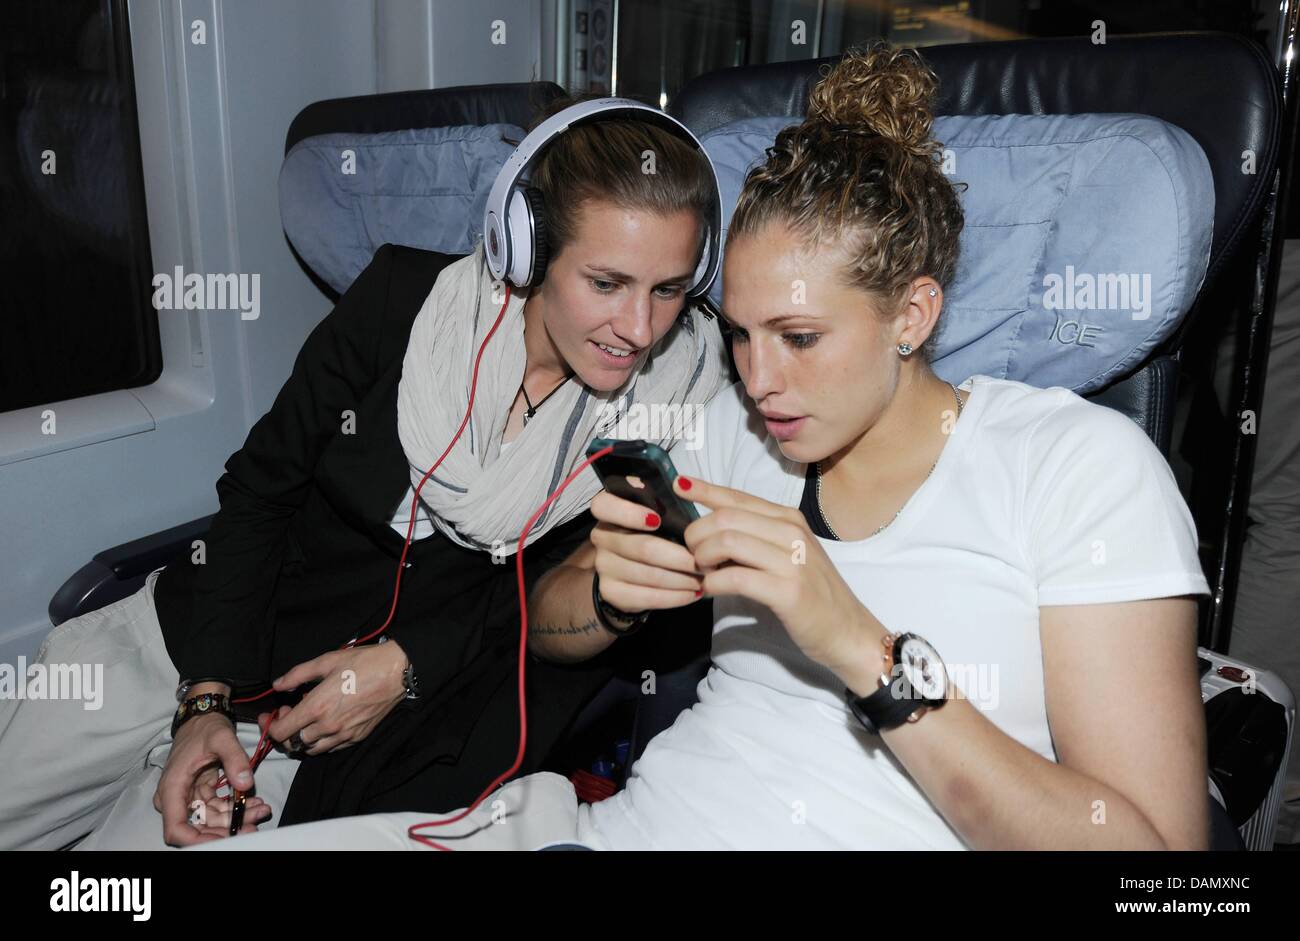 German women's national soccer players Simone Laudehr (L) and Kim Kulig listen to music during a ride in an ICE train from Frankfurt to Duesseldorf, Germany, 01 July 2011. Germany's next FIFA Women's World Cup match will take place in Moenchengladbach on 5 July 2011. Photo: Markus Gilliar/GES-Sportfoto/DFB Stock Photo